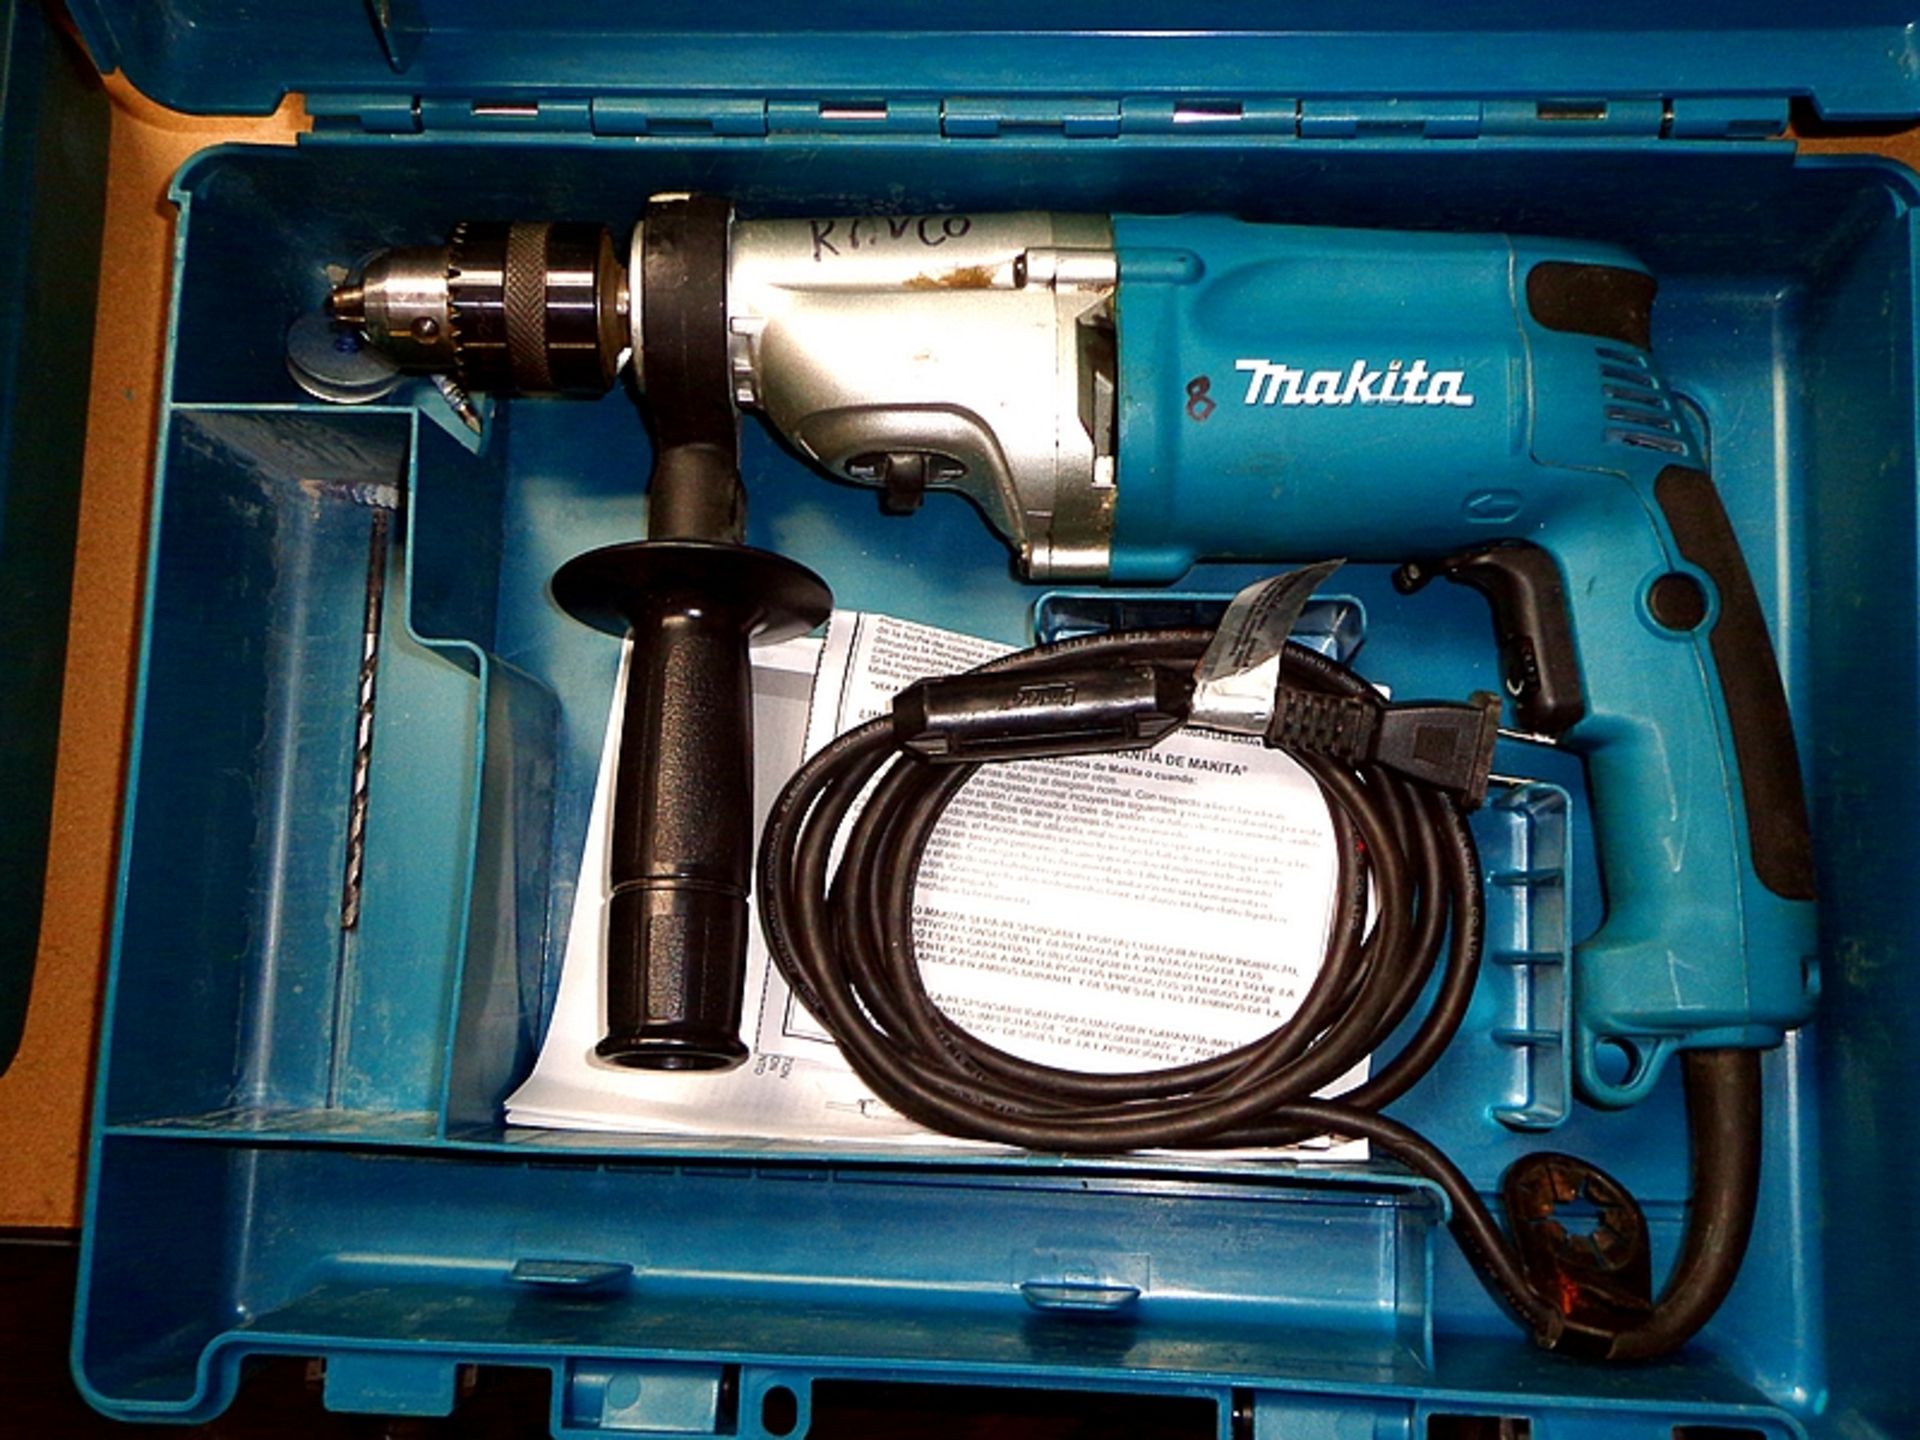 MAKITA HP2050 ELECTRIC 2 SPEED HAMMER DRILL W/CASE & HANDLE